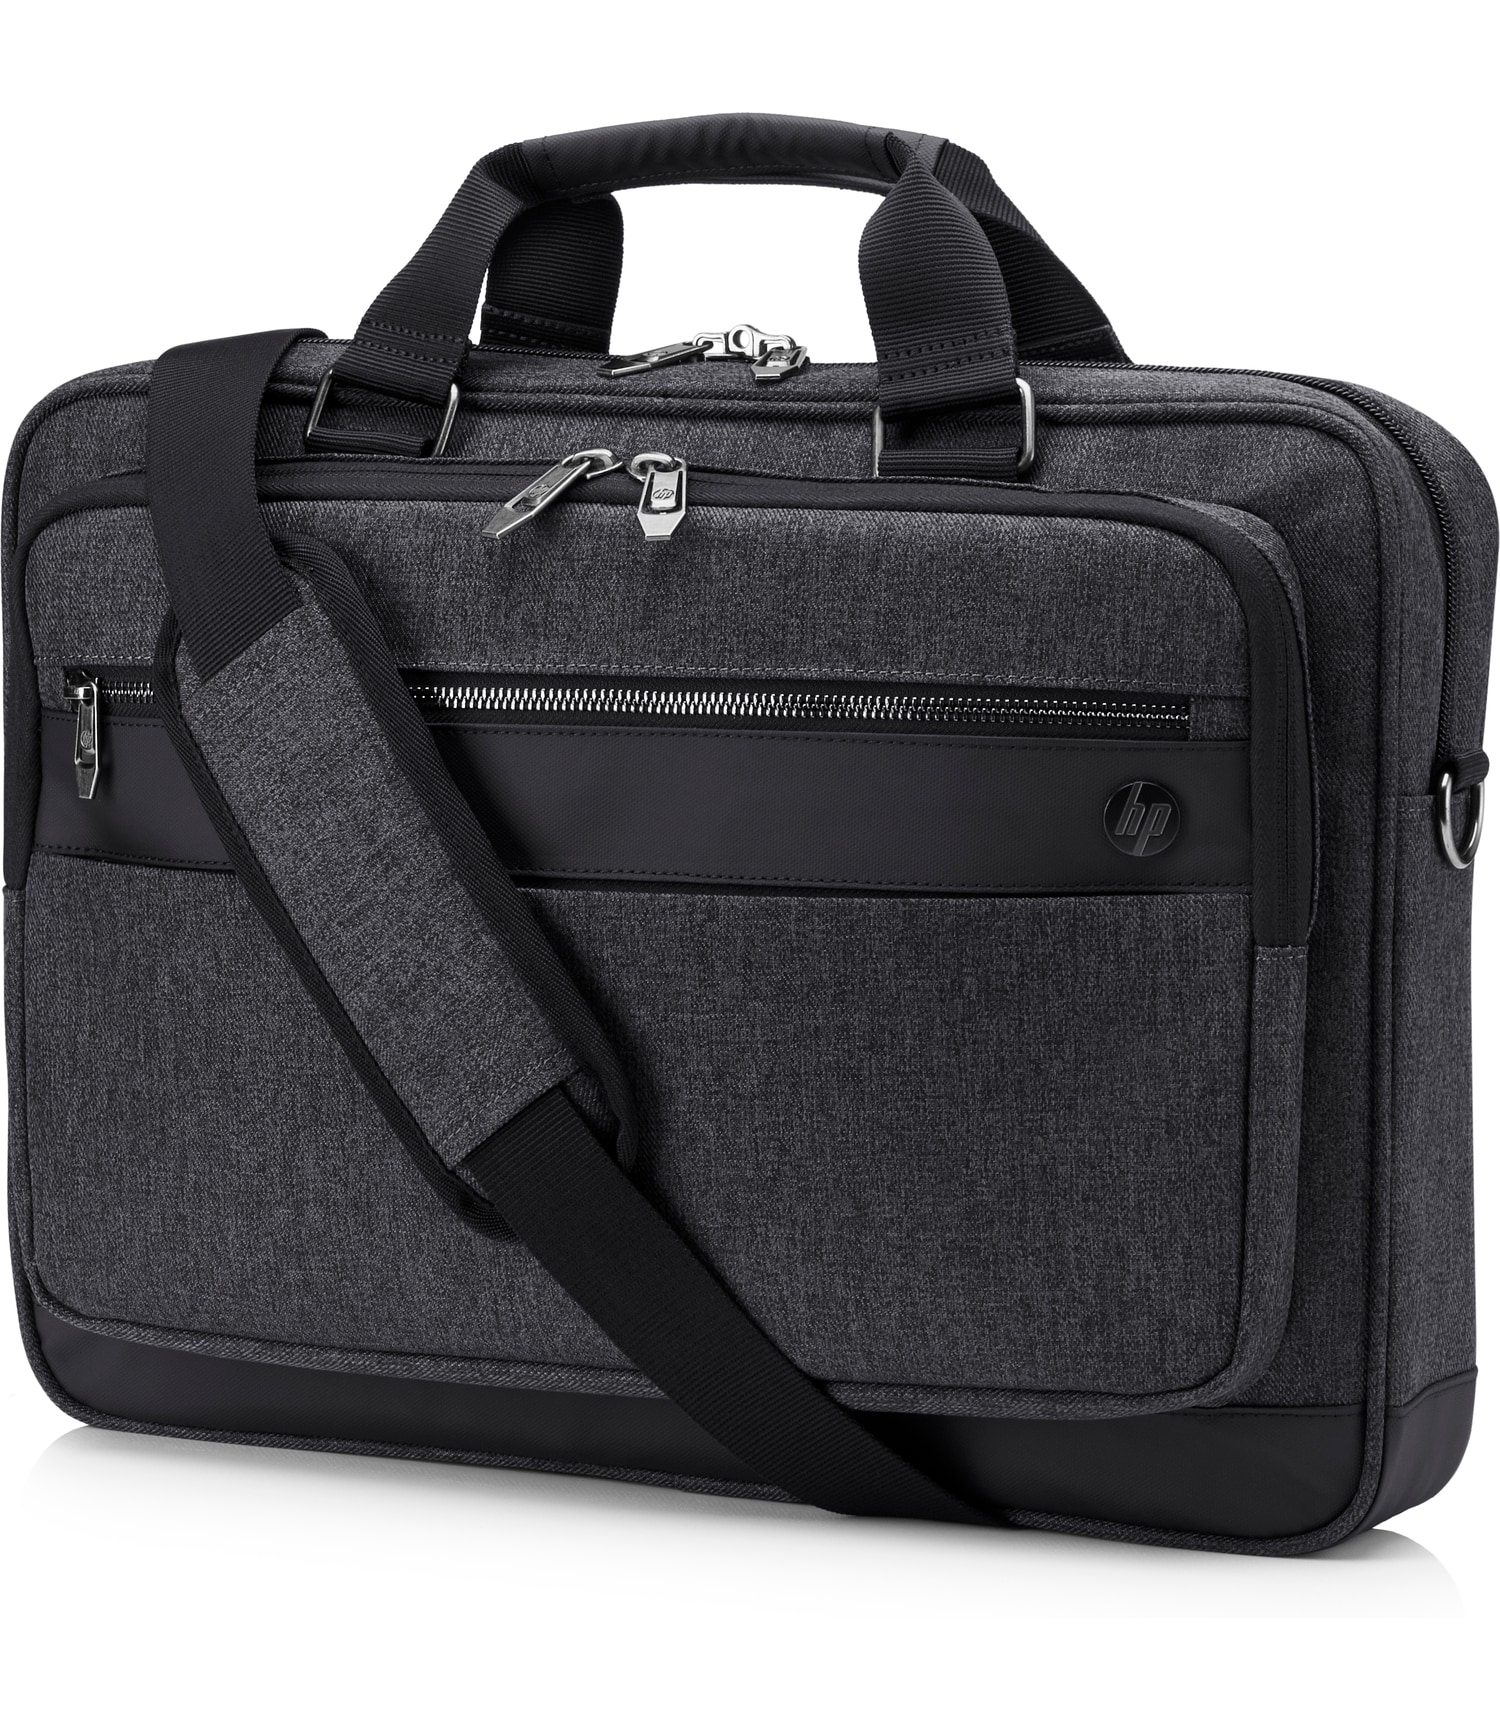 HP Executive Top Load Notebook Case | 15.6" | Gray | 6KD06UT - image 1 of 4